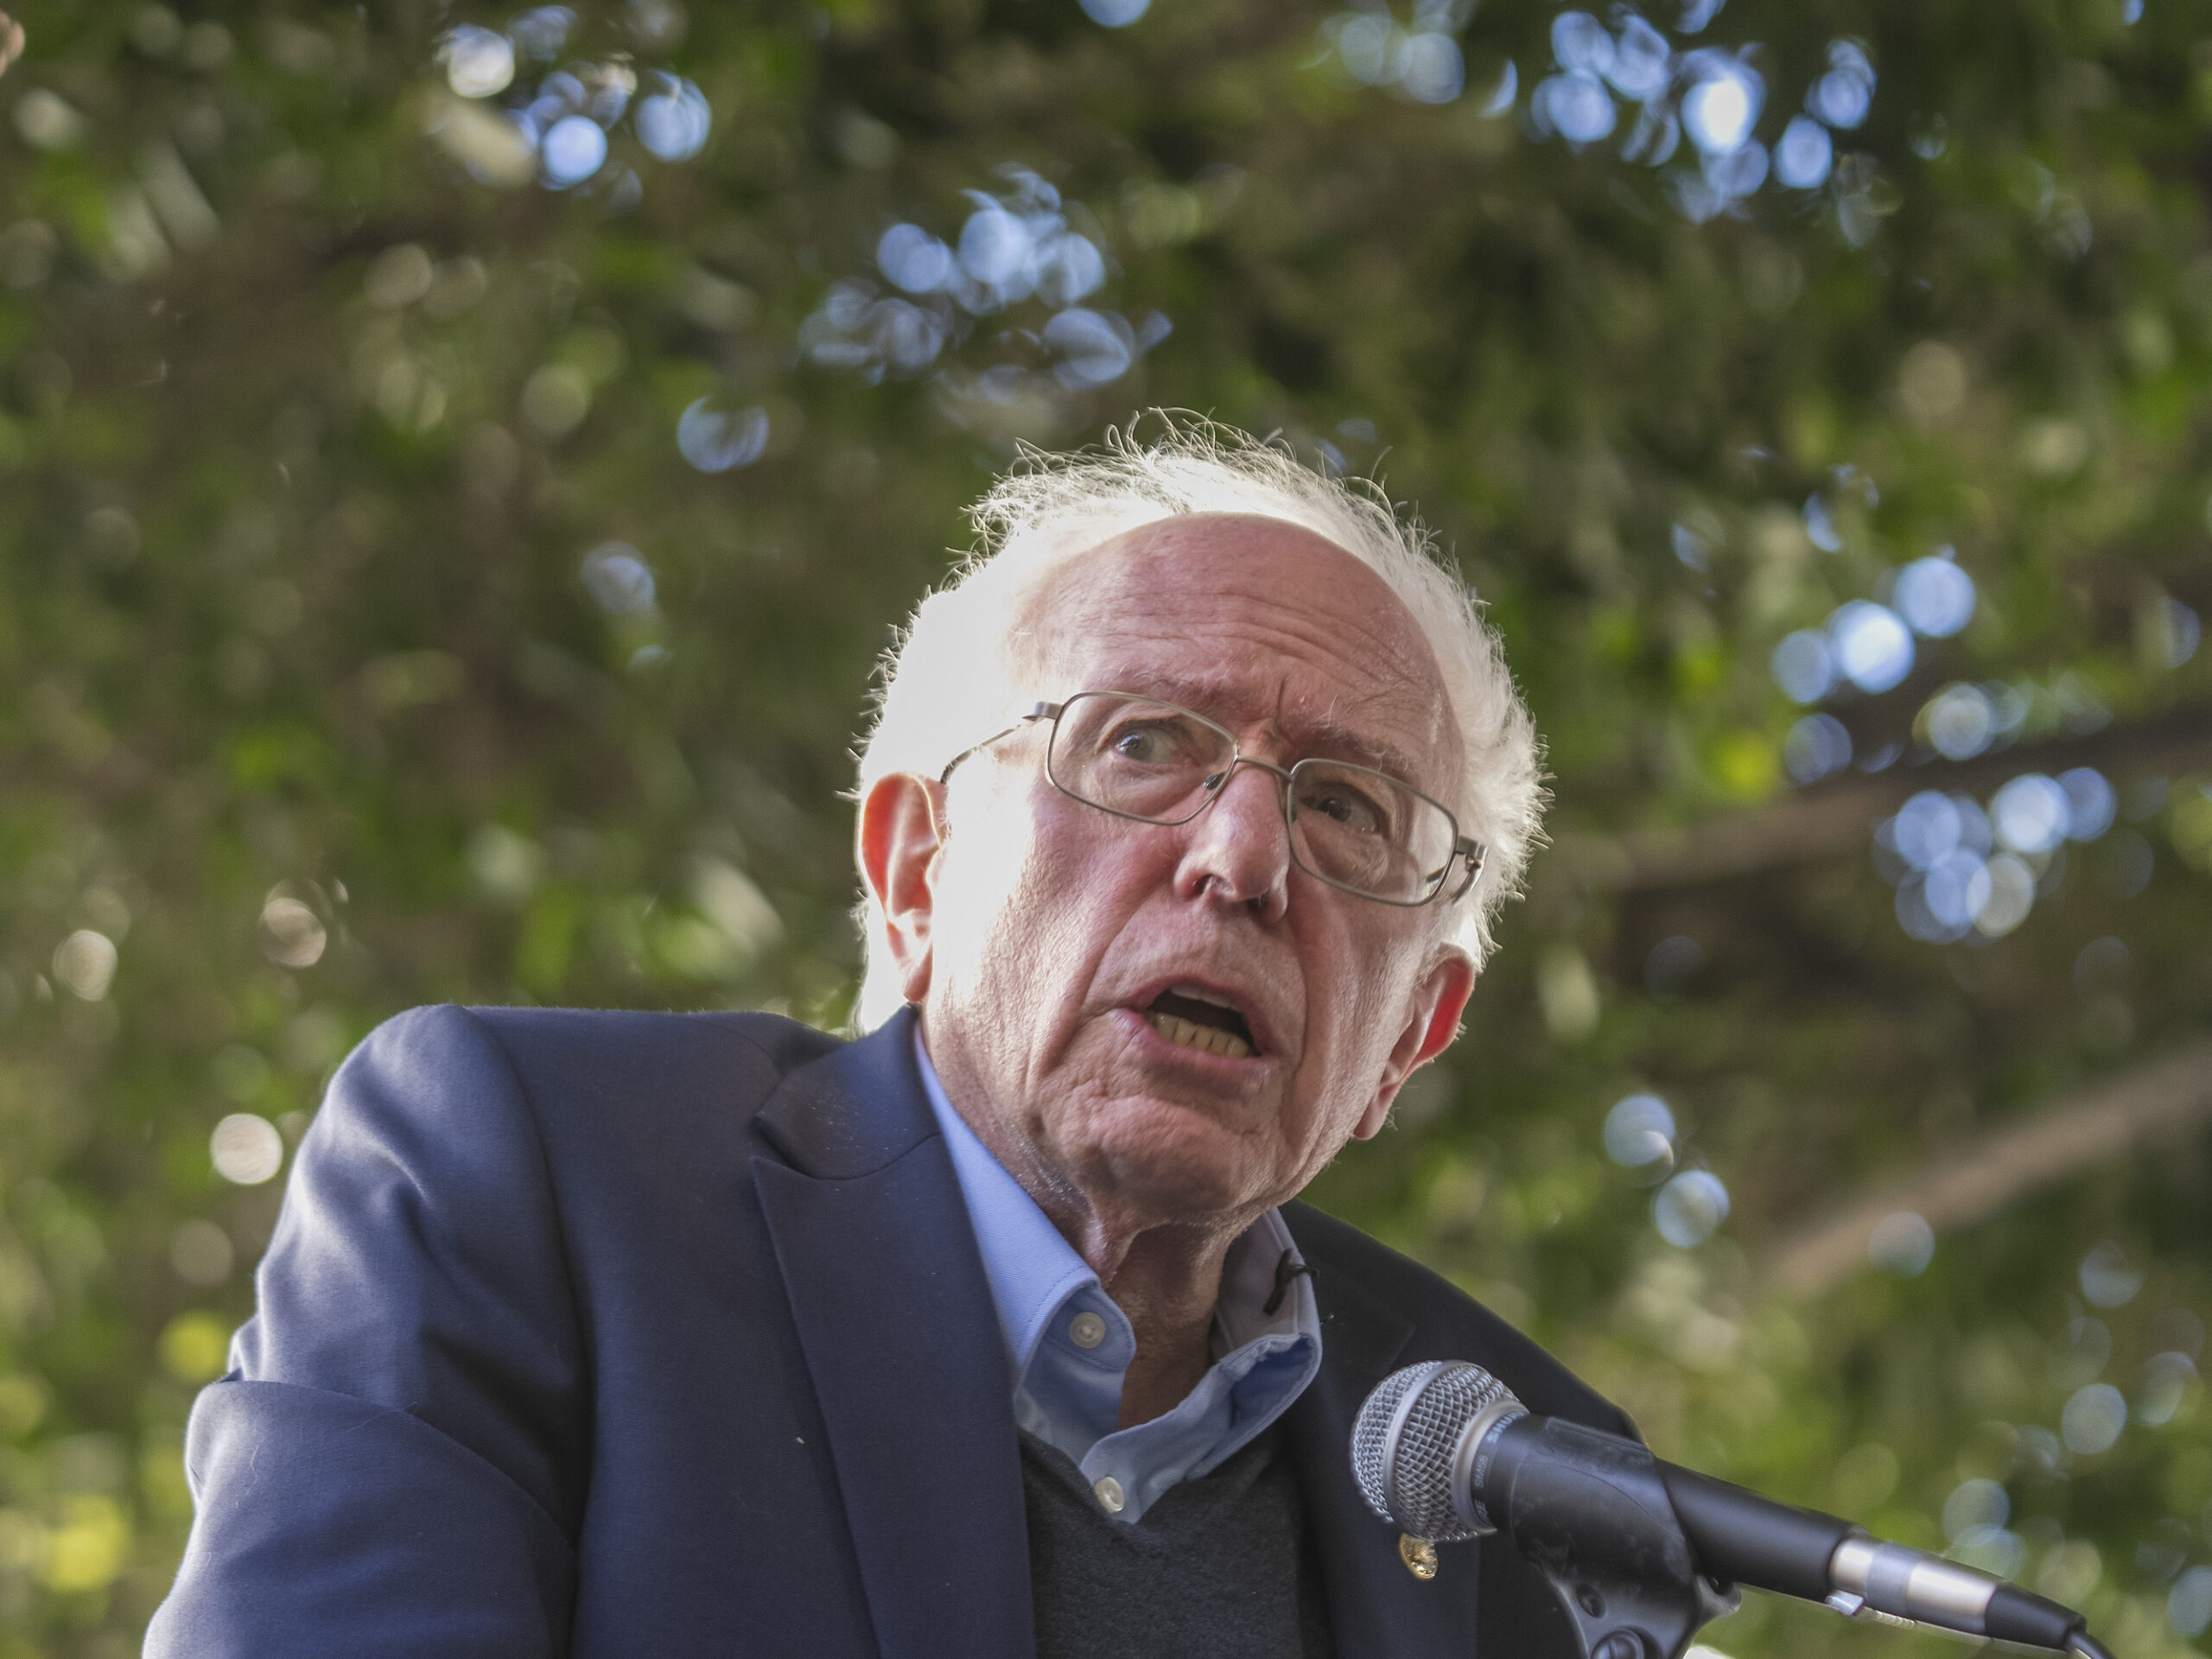 A man was charged with setting a fire at Sen. Bernie Sanders’ Vermont office